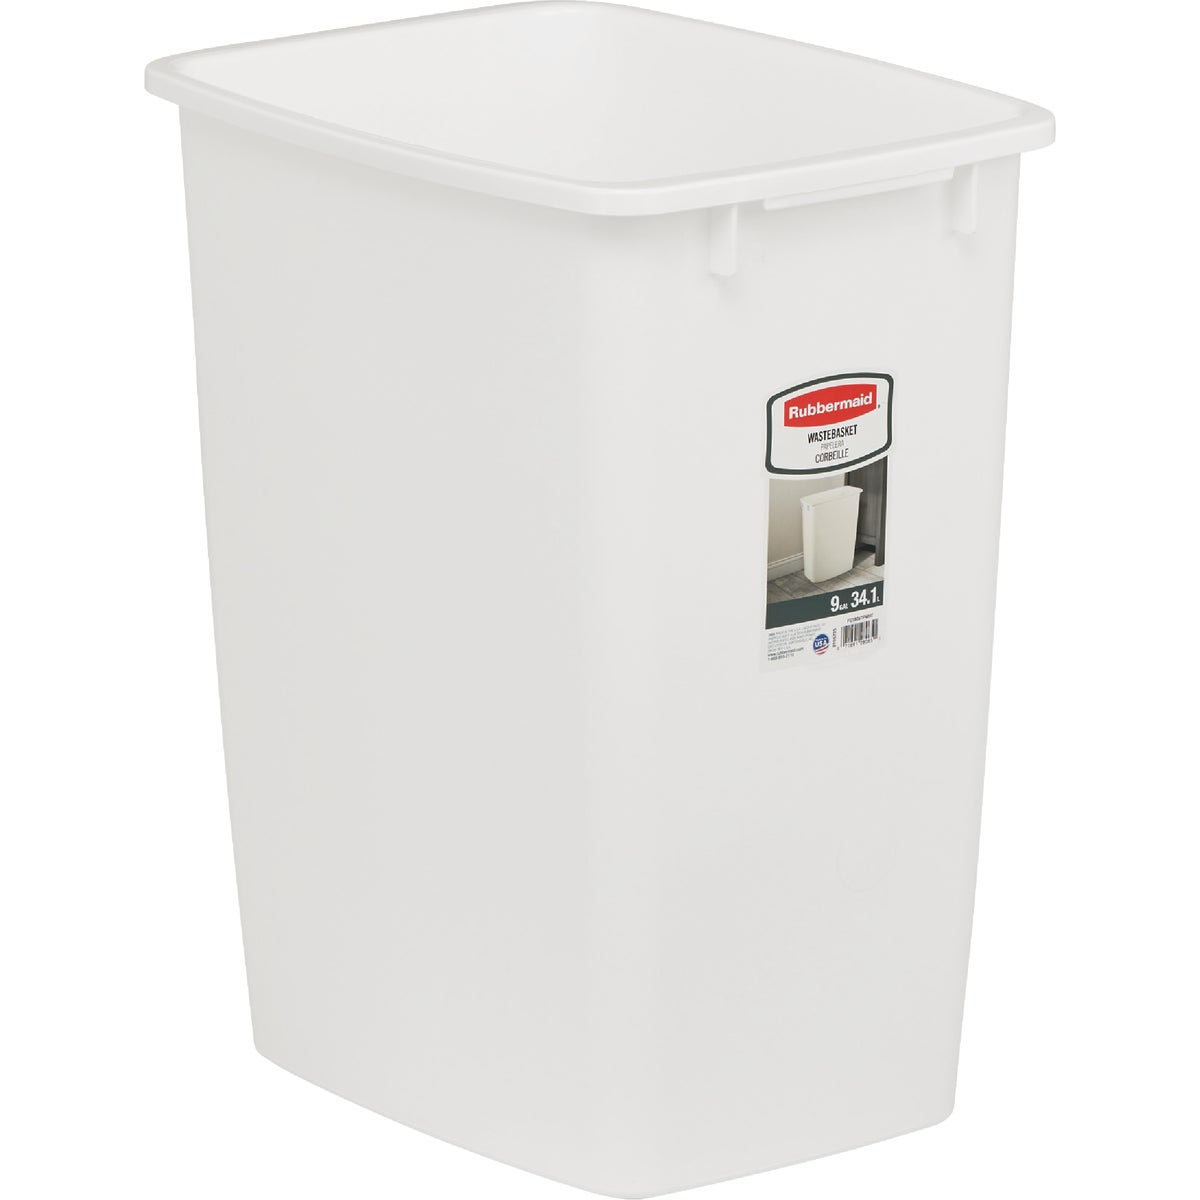 Item 637858, Durable, lightweight wastebasket features extra-tough rim and sides that 